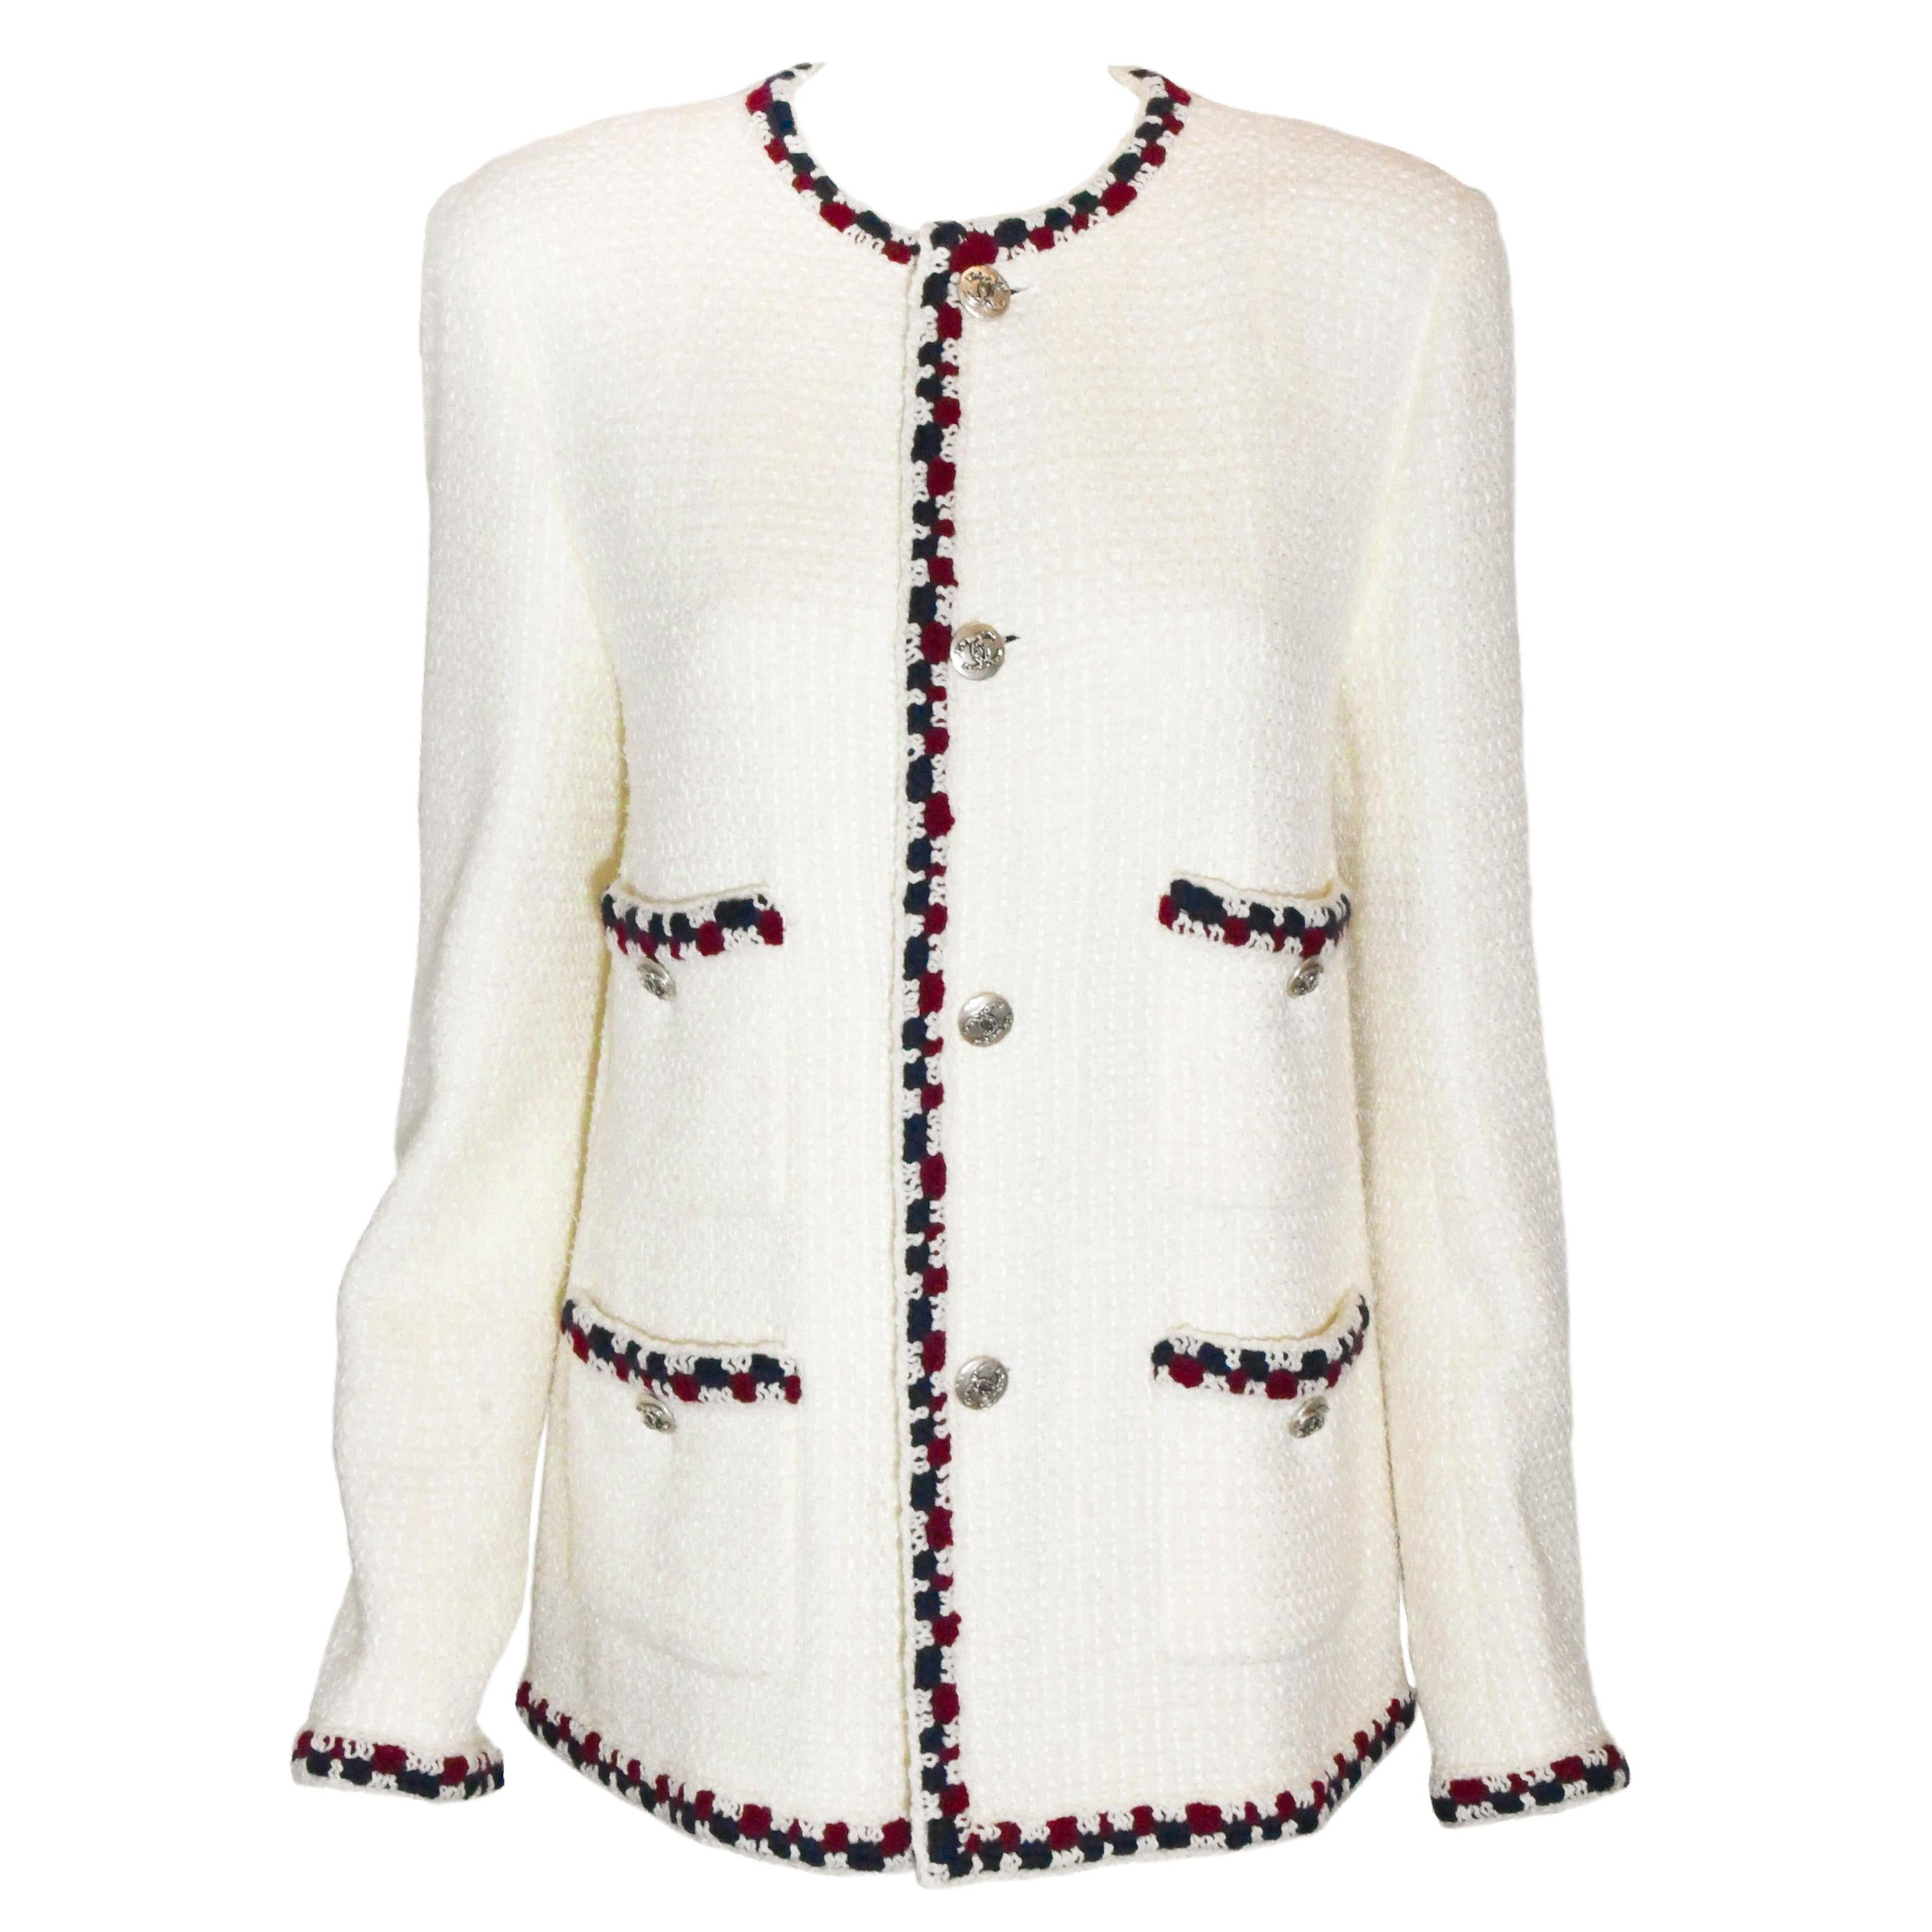 Chanel Ivory Tweed Jacket with Crochet Red and Blue Yarn Trim 46 EU